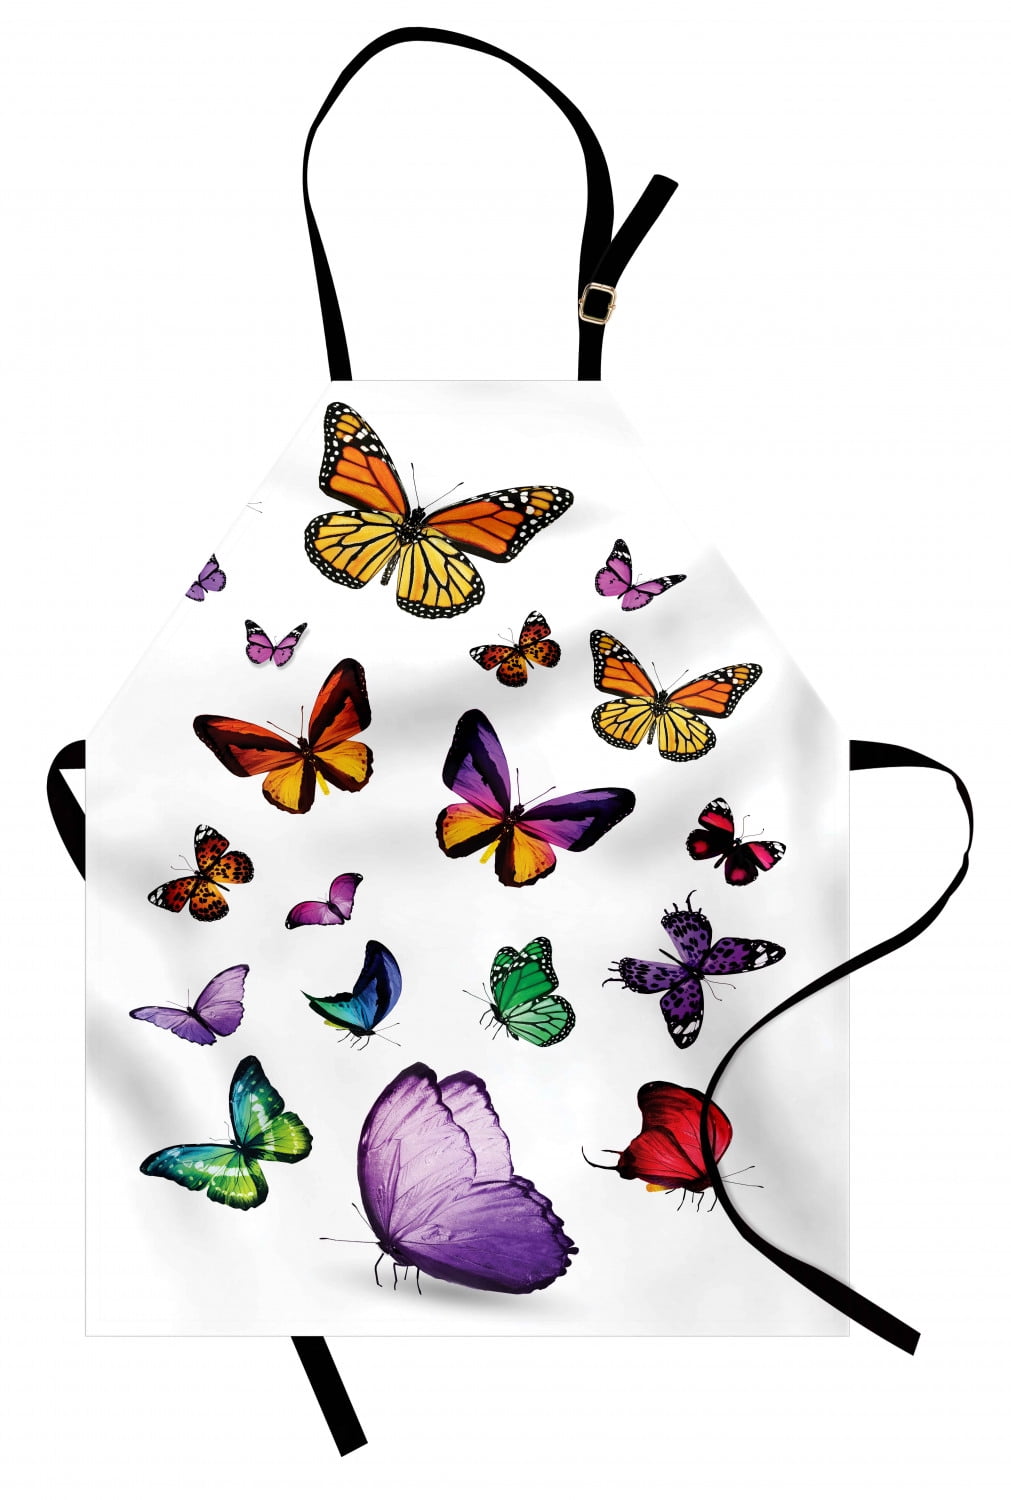 Adult Size Unisex Kitchen Bib with Adjustable Neck for Cooking Gardening Colorful Butterflies Flying Composition Summertime Seasonal Animals Print Blue Black Ambesonne Animal Apron